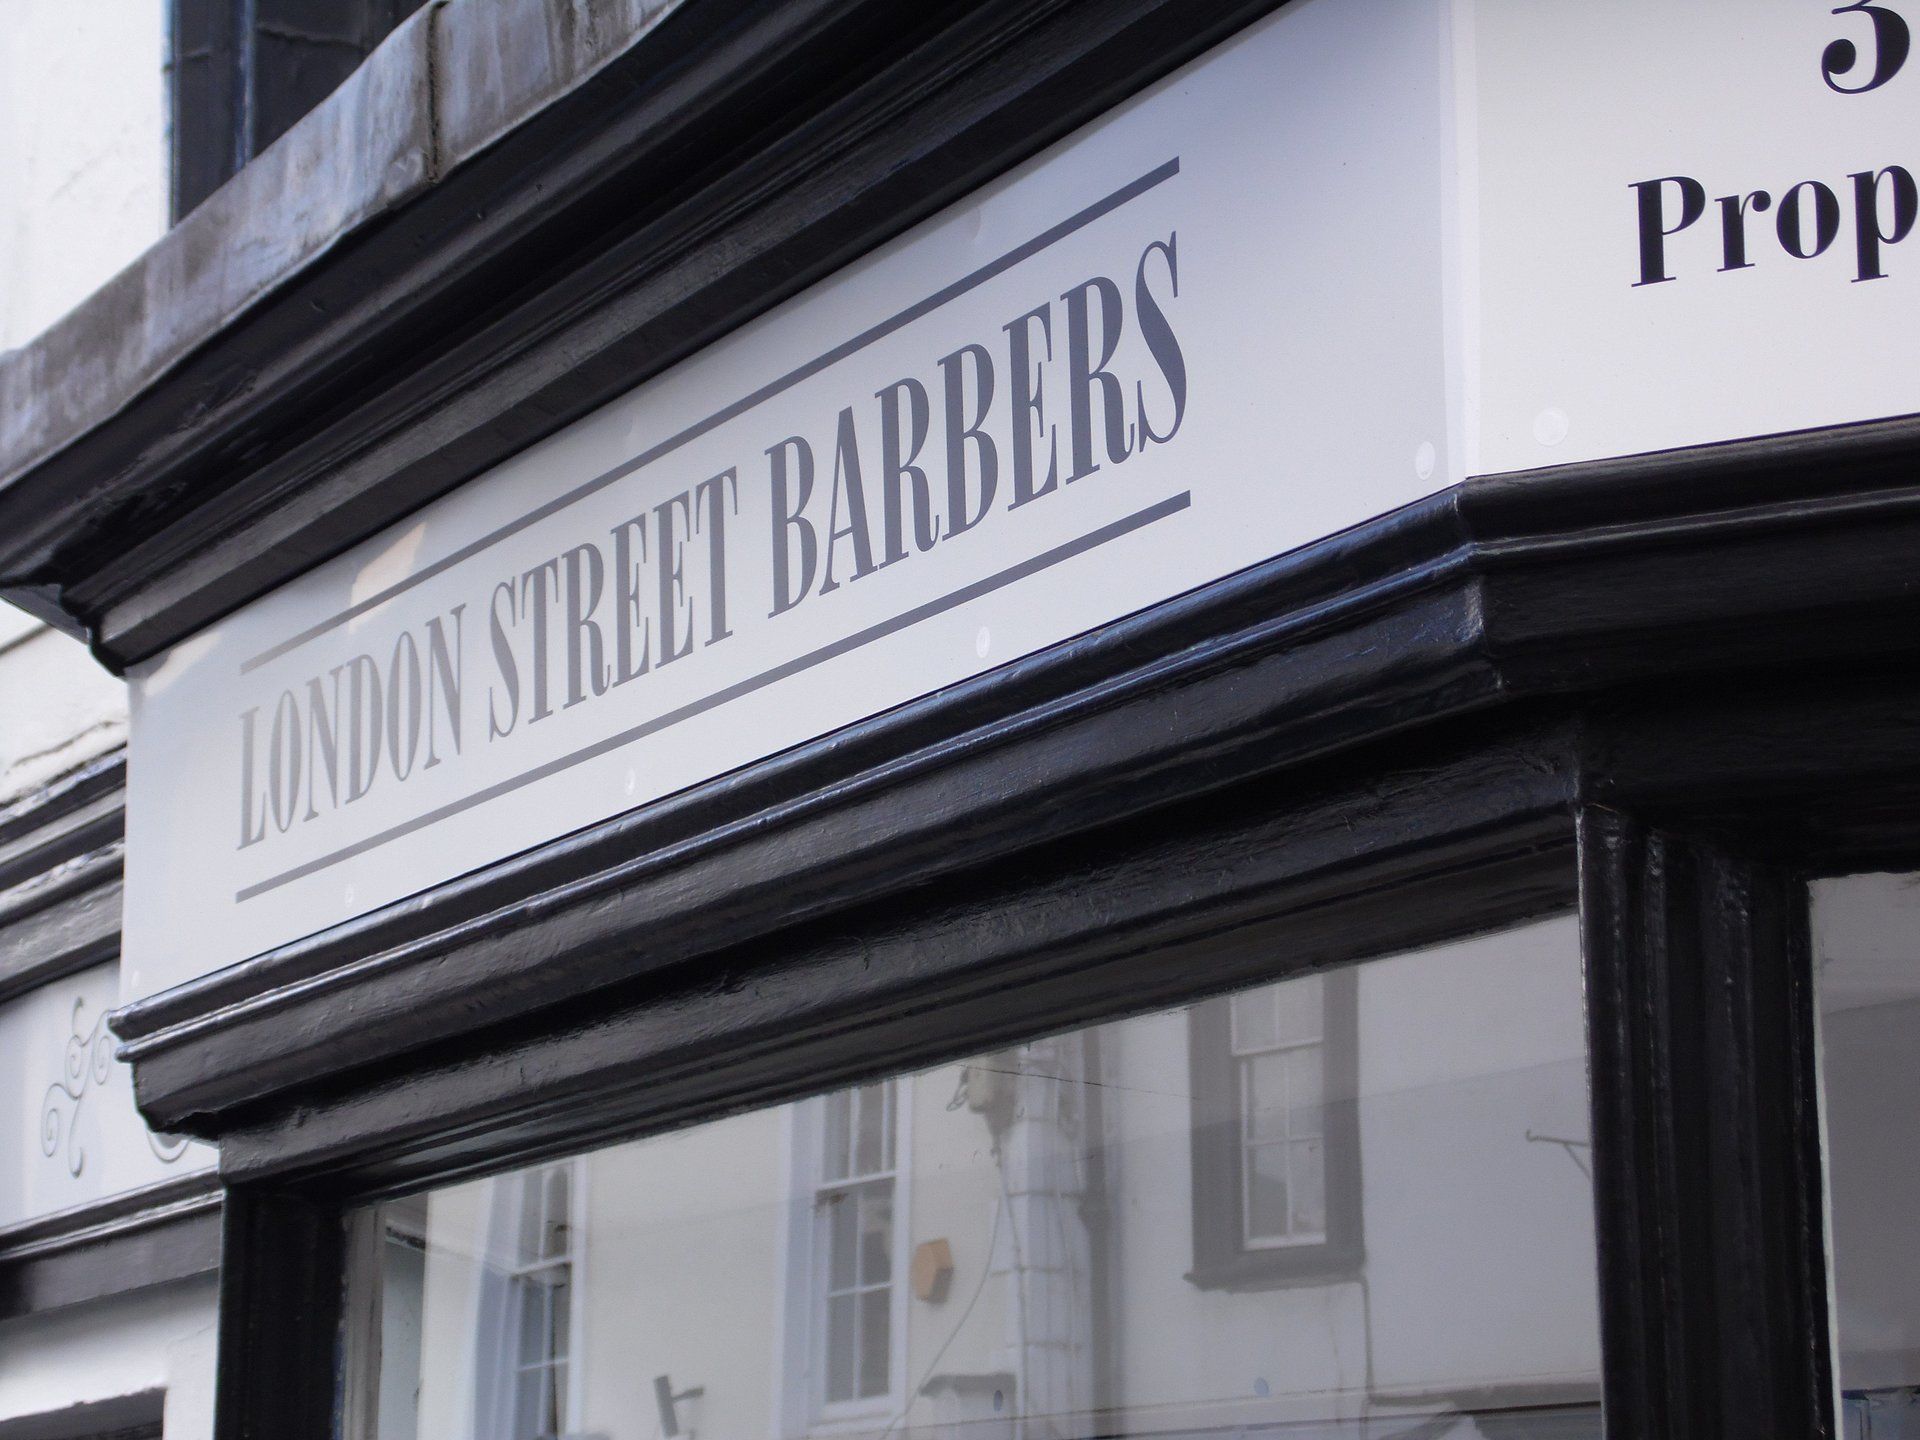 Retail signage - London Street Barbers - Oxford and Swindon